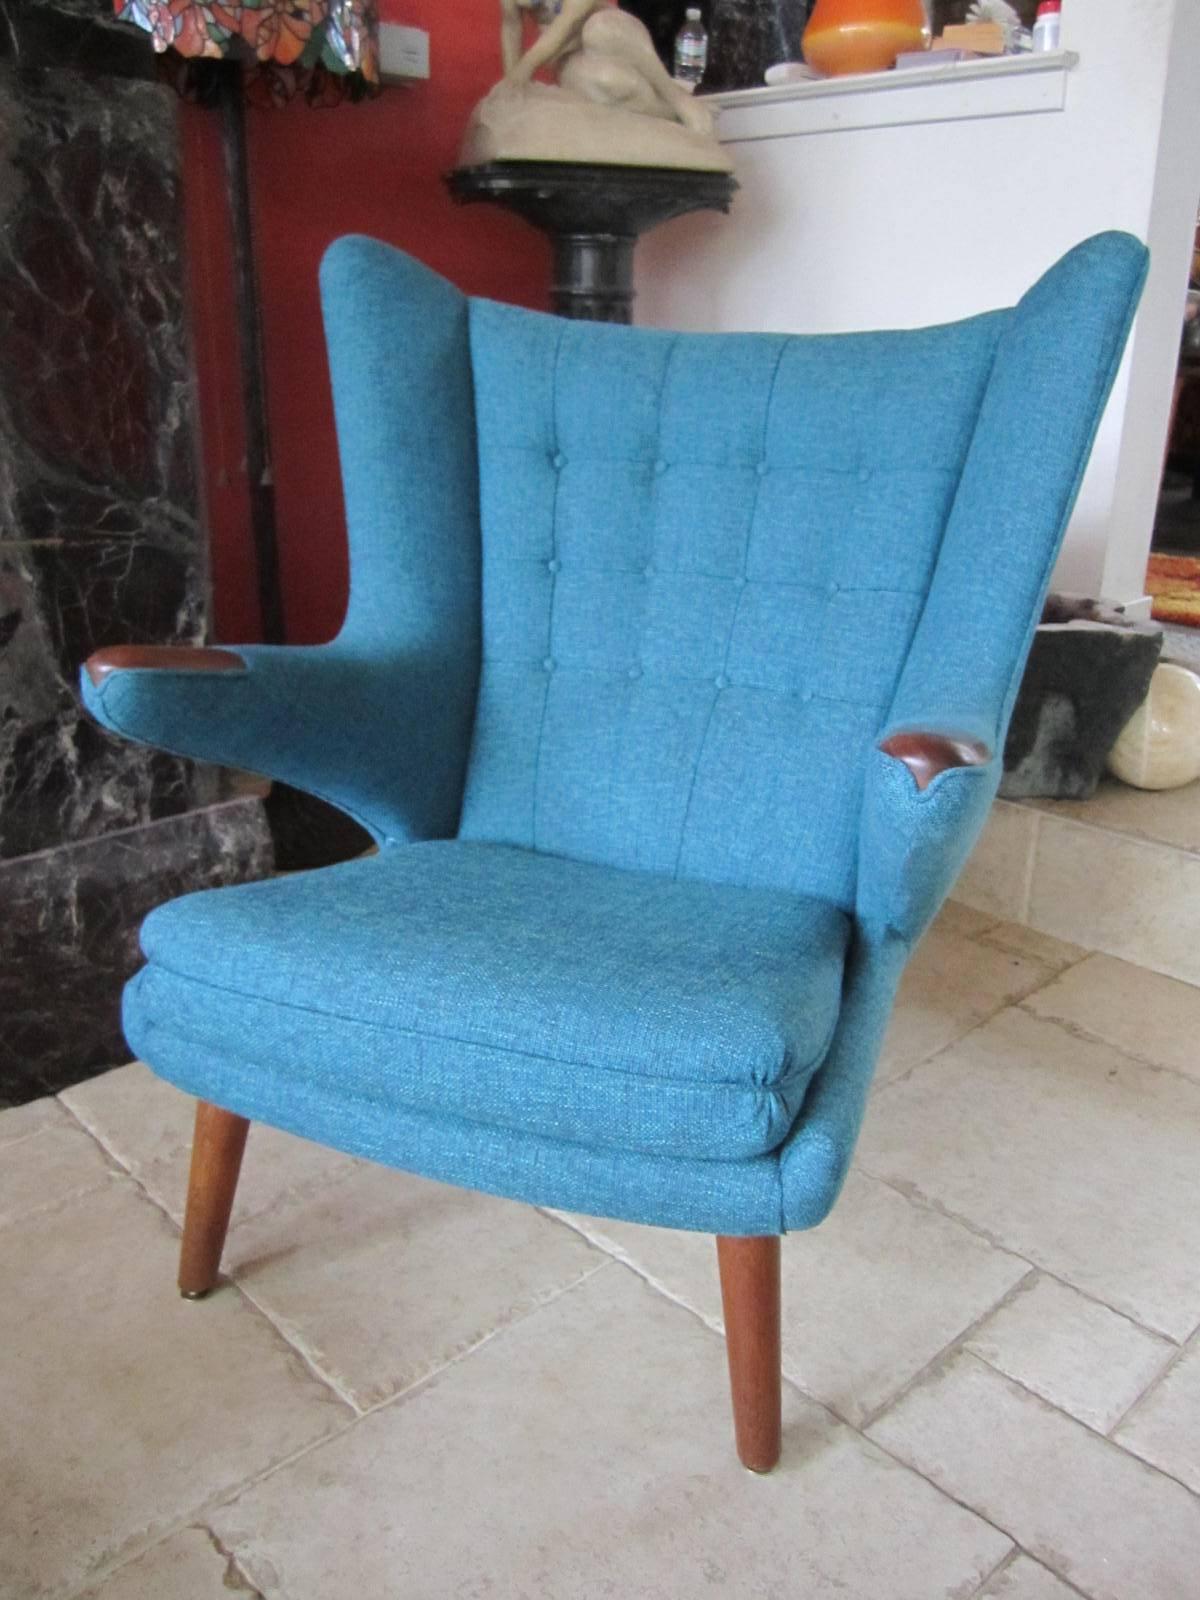 Iconic vintage modern Papa Bear chairs with fabulous new upholstery, widely celebrated design (AP19) by AP Stolen dates back to the 1950s. This example is in pristine condition with brand new high-end woven deep turquoise fabric. The original owners